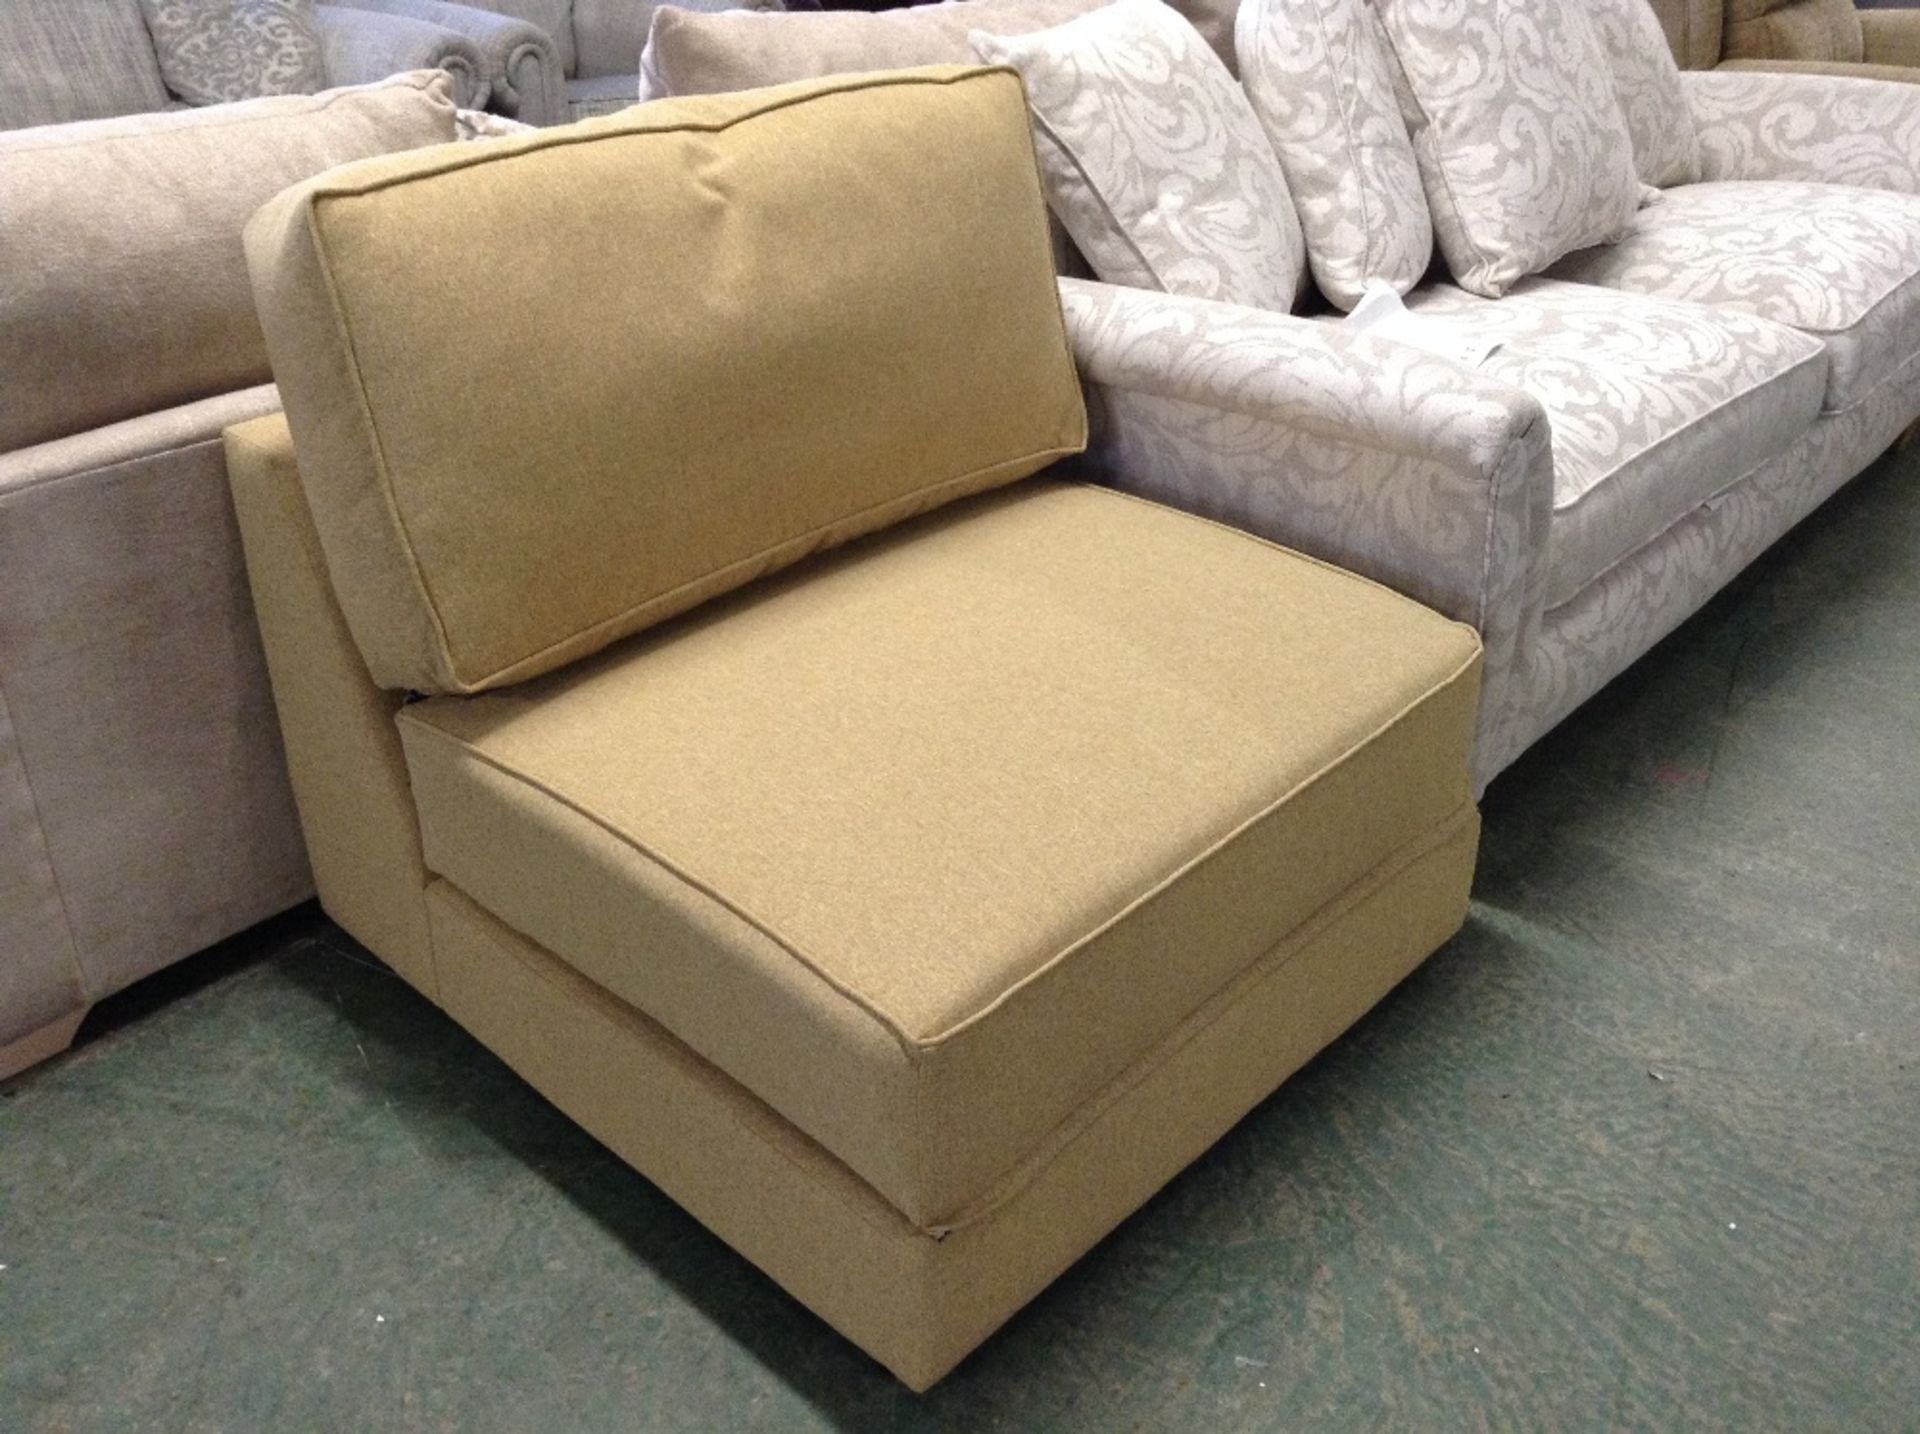 CREAM AND BEIGE PATTERNED LARGE 3 SEATER SOFA (TRO - Image 2 of 2